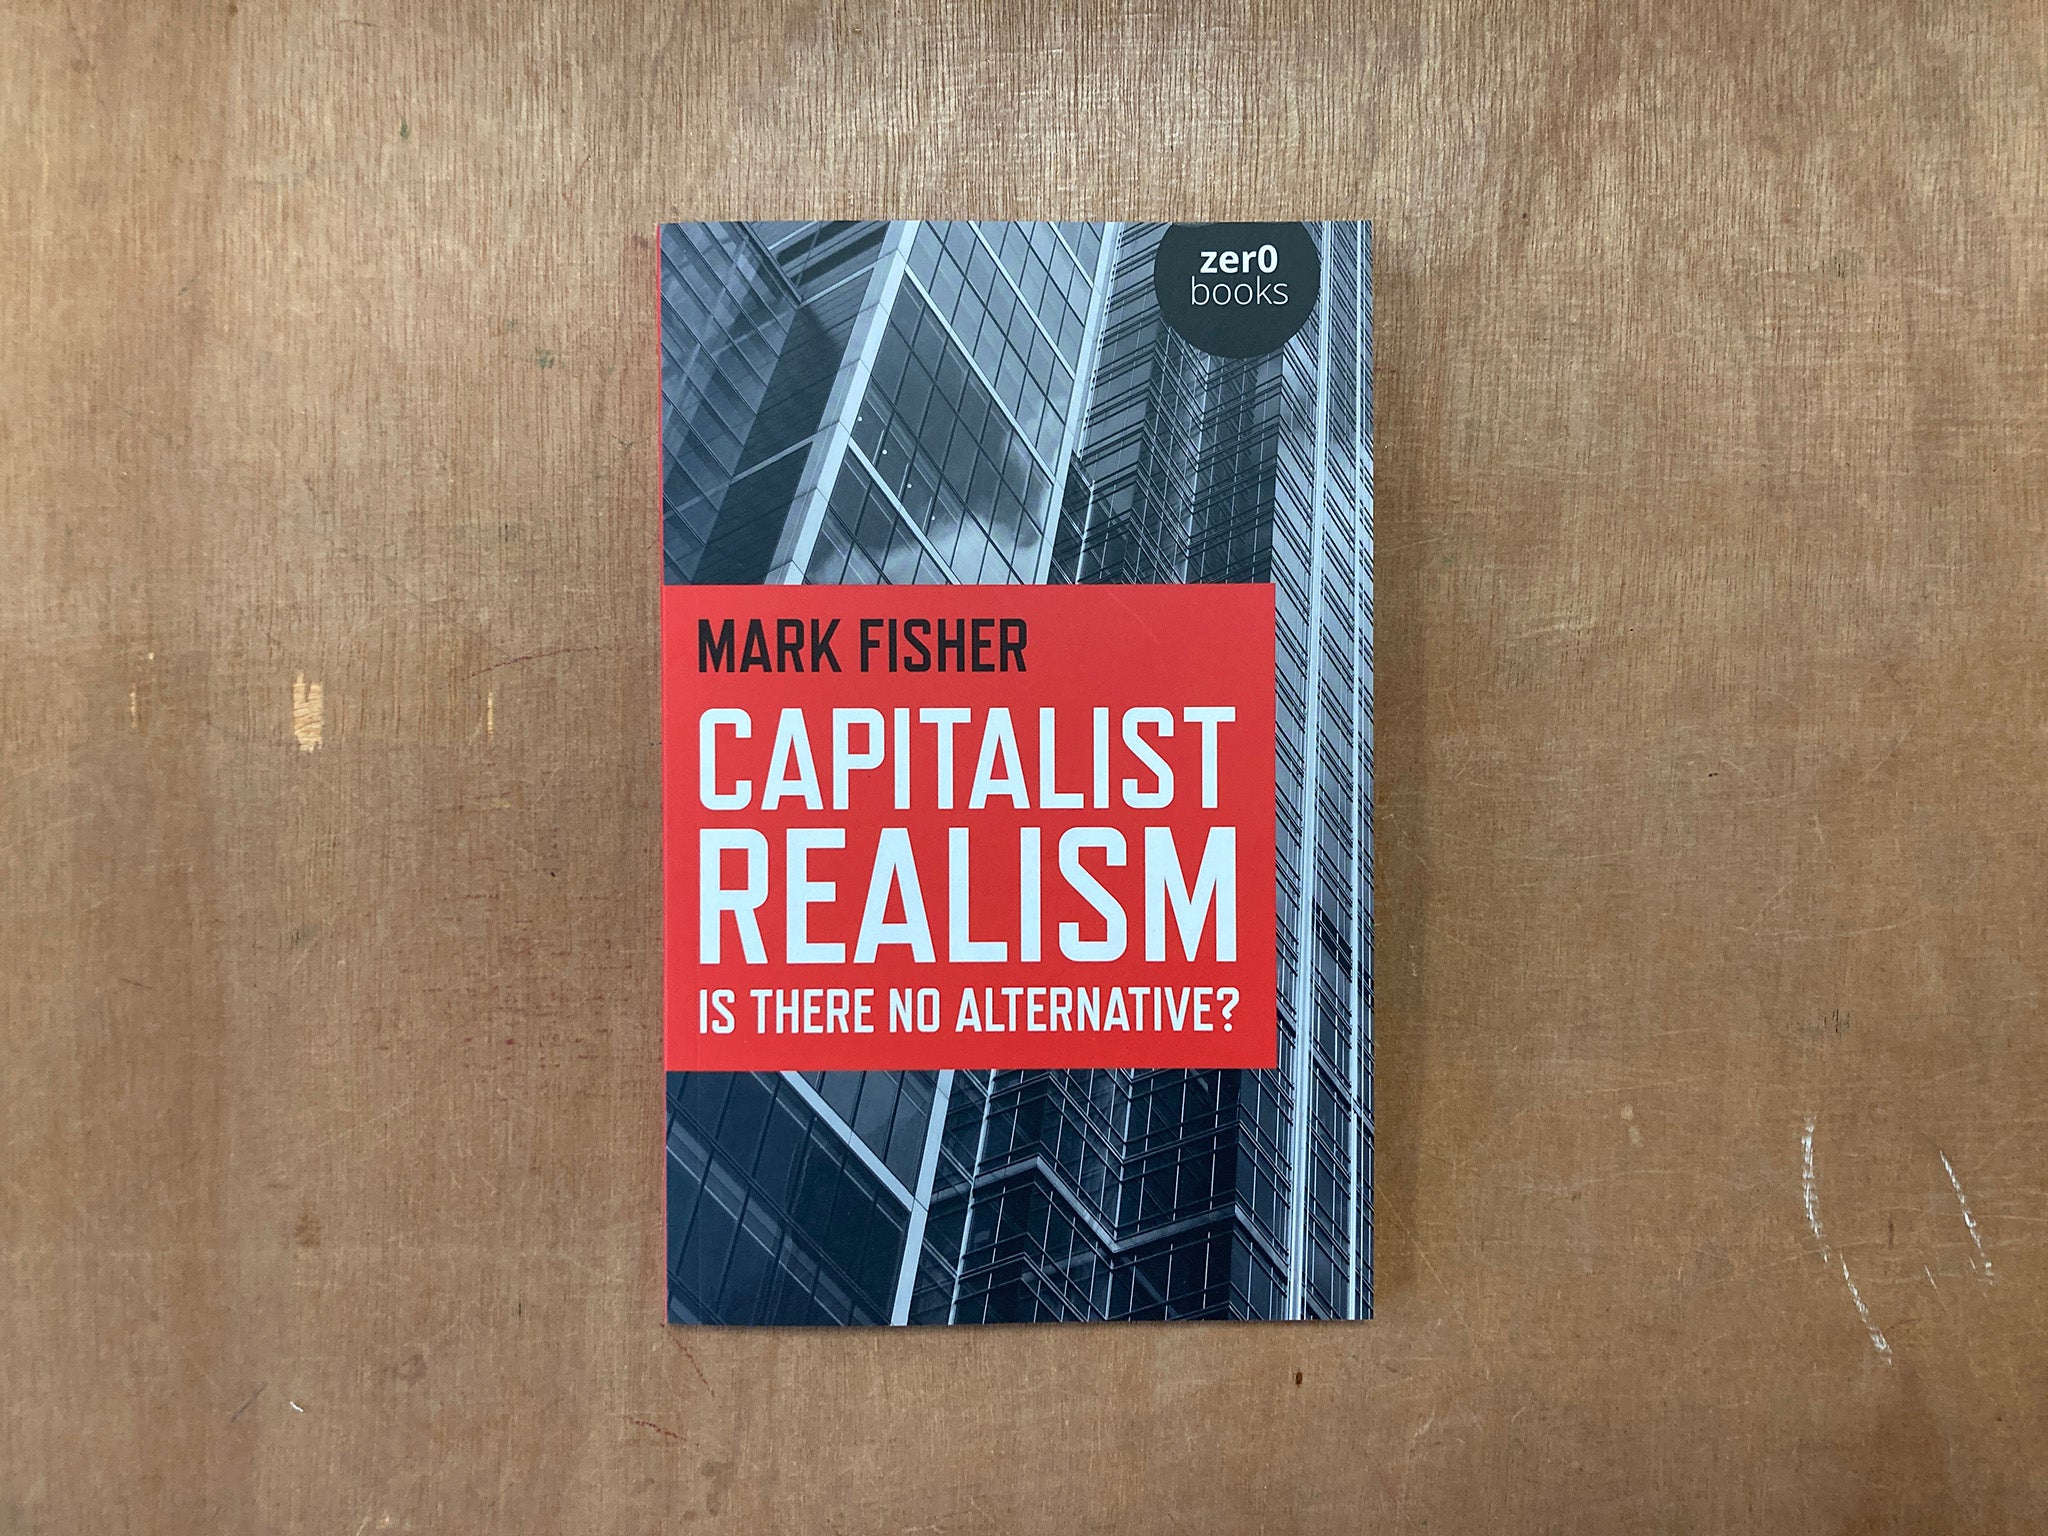 CAPITALIST REALISM by Mark Fisher